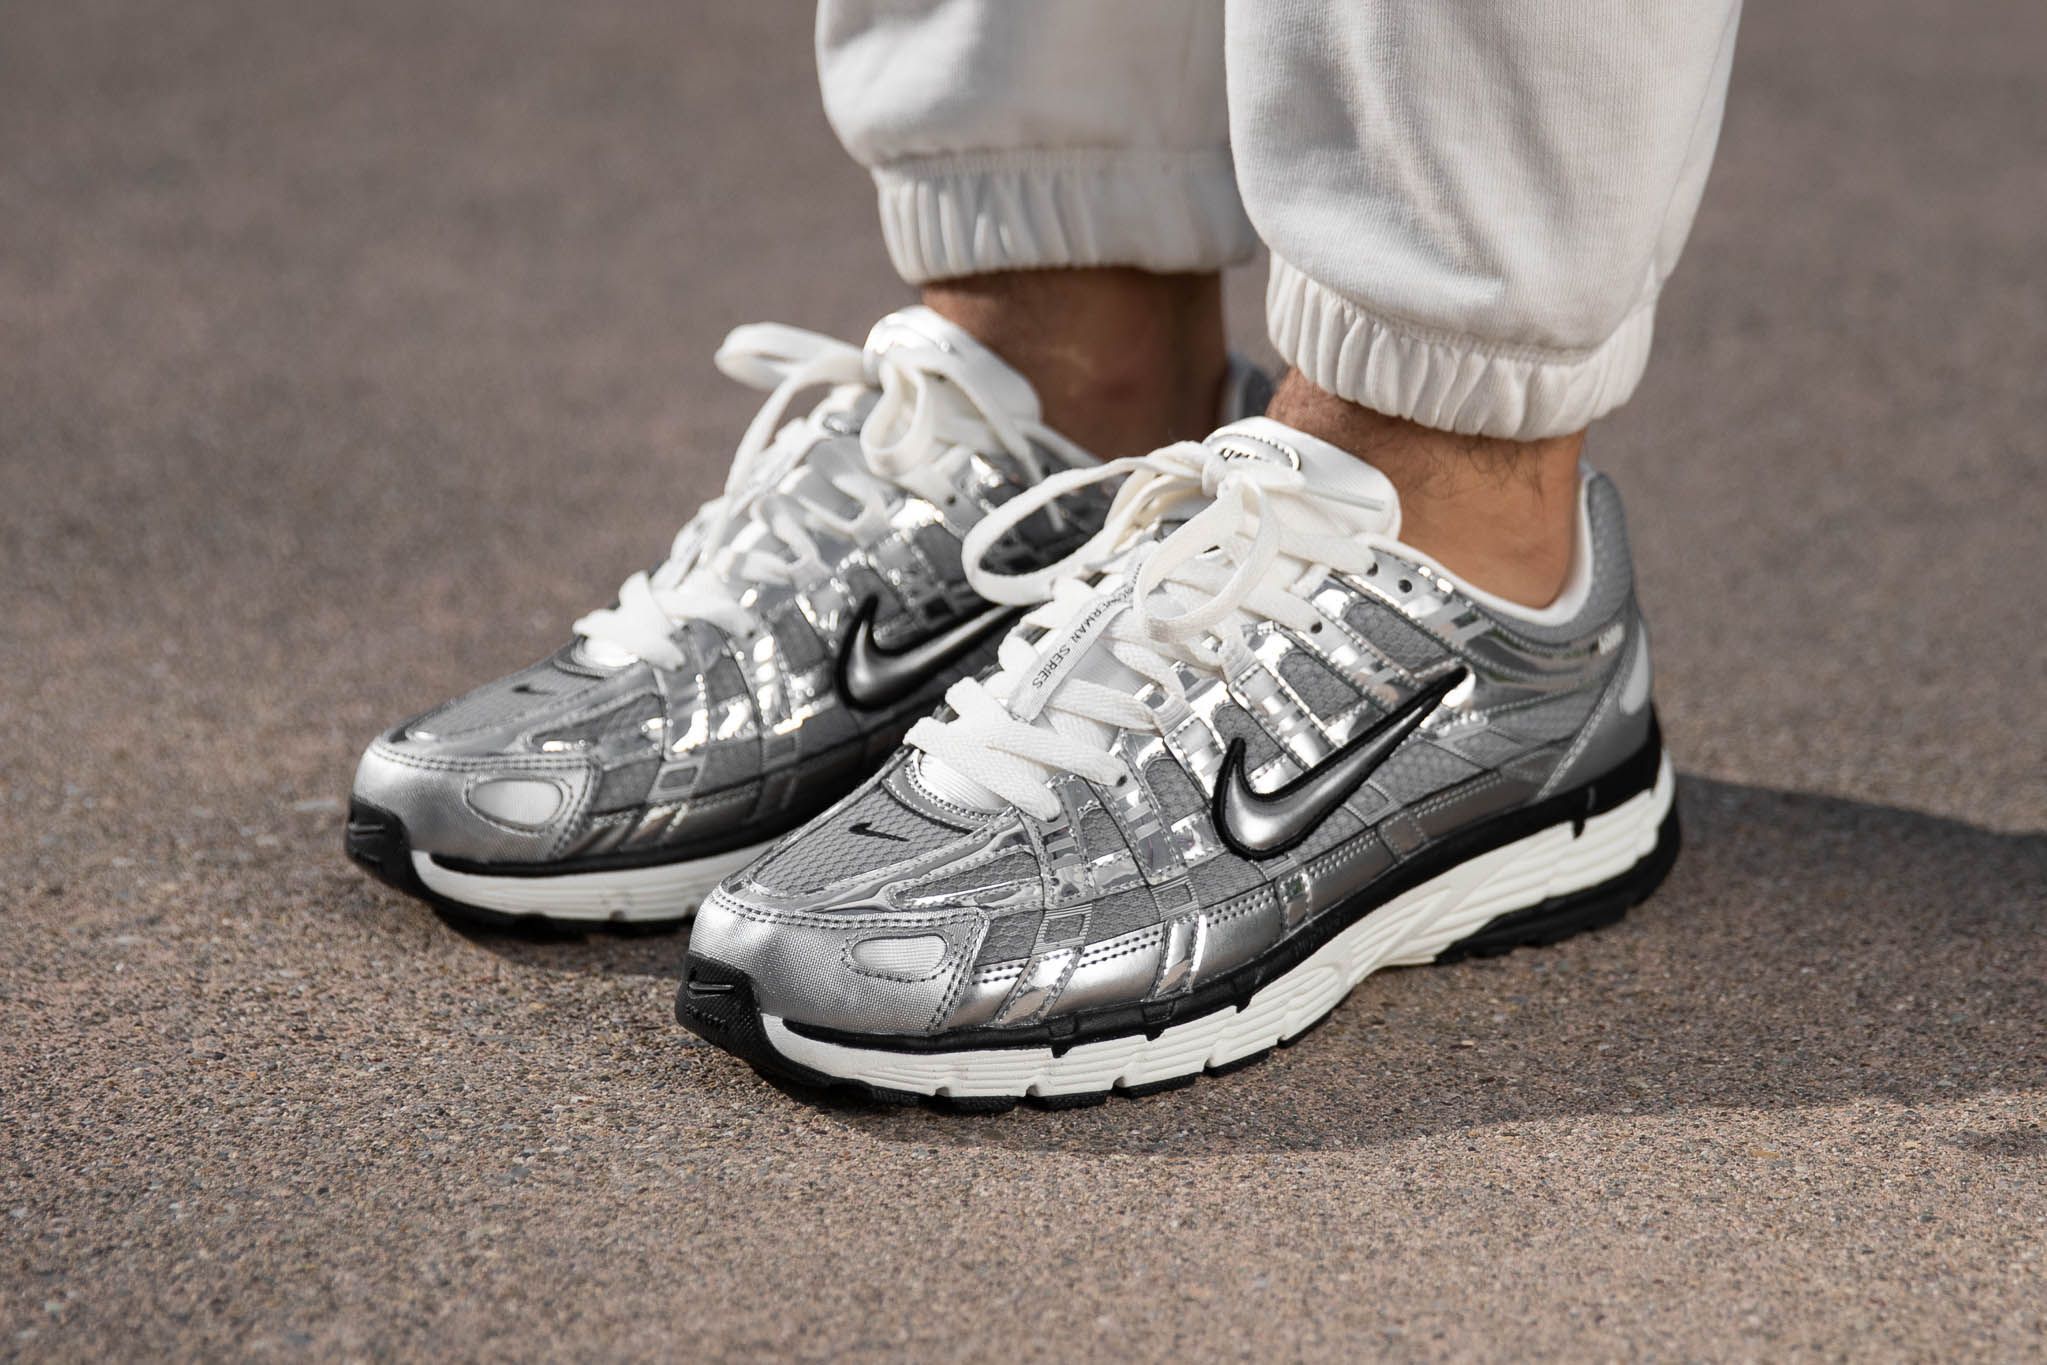 Titolo on Twitter: "silver P-6000 by Nike Available For Purchase ➡️ https://t.co/wstFOqTEtw ⁠ US 7 (40) - US 12 (46)⁠ style code 🔎 CN0149-001⁠⁠ #nikesportswear #silver #nikep6000 #titolo #titolostyle https://t.co/IduBTrtWcf" / Twitter